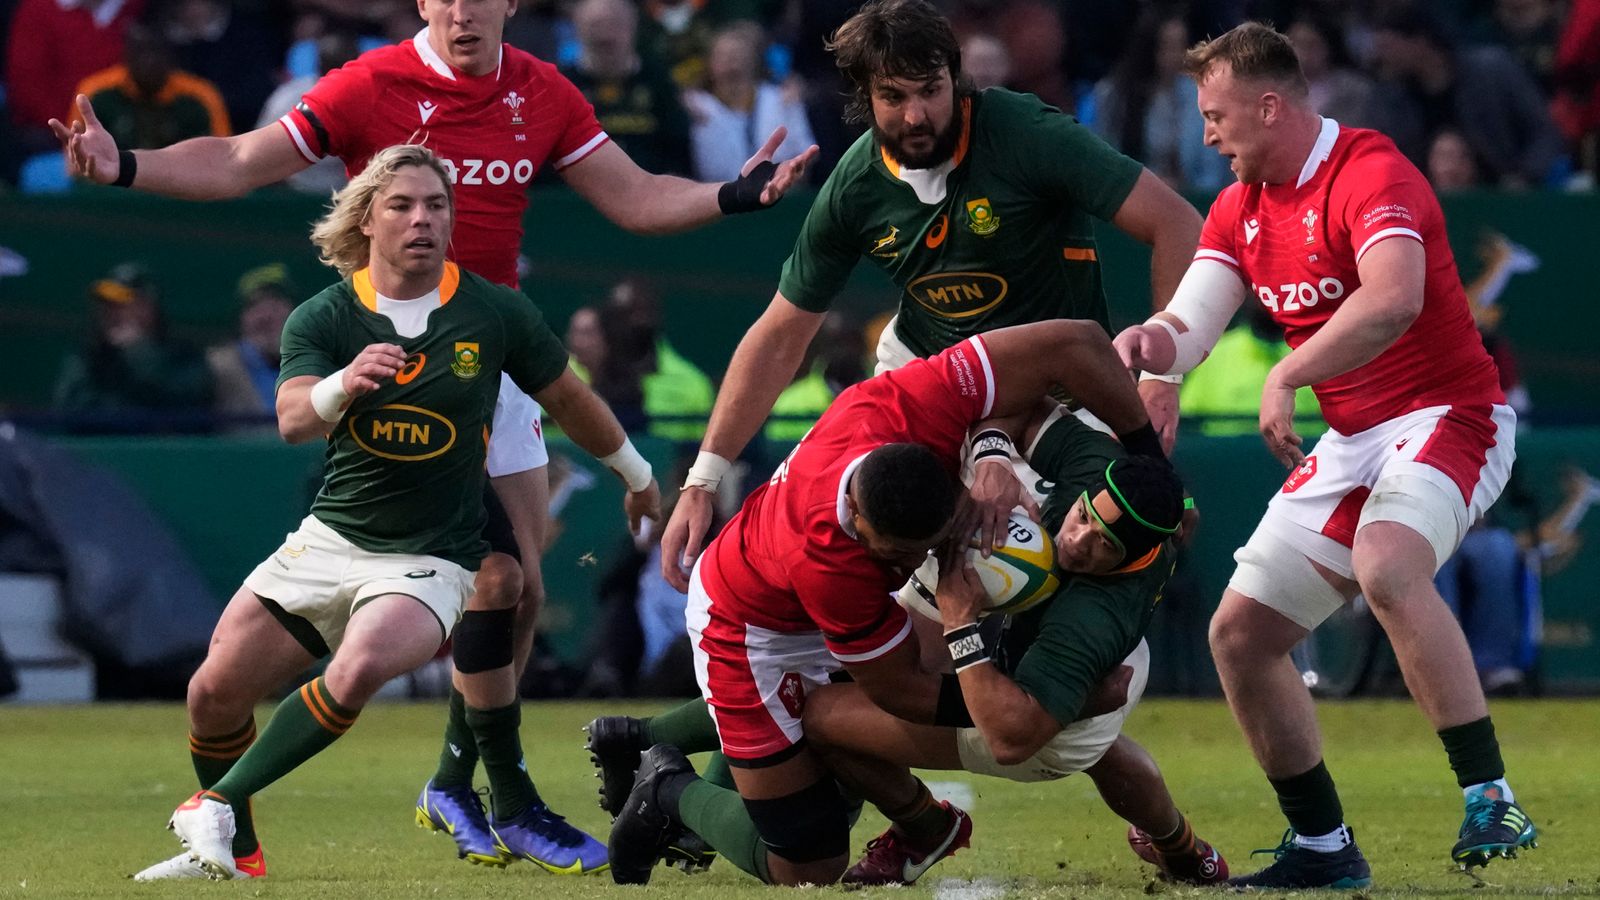 South Africa 32 - 29 Wales